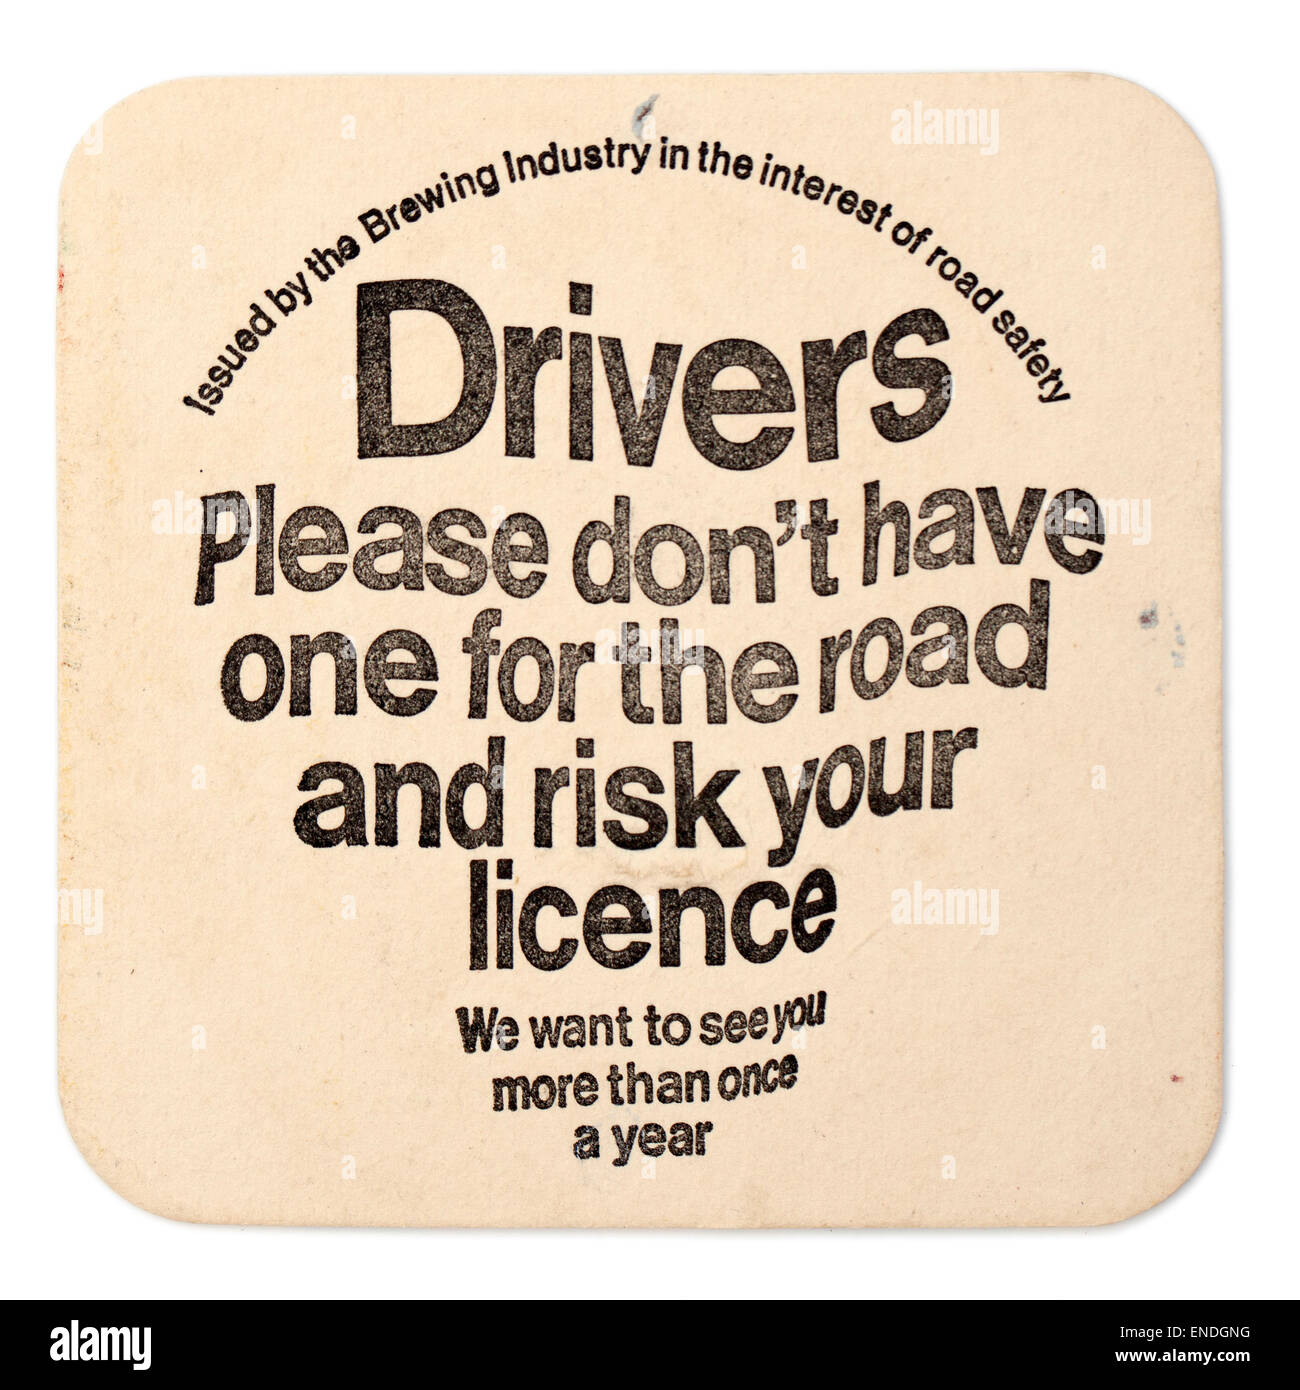 Vintage British Beer Mat with Government Drink Driving Campaign Stock Photo